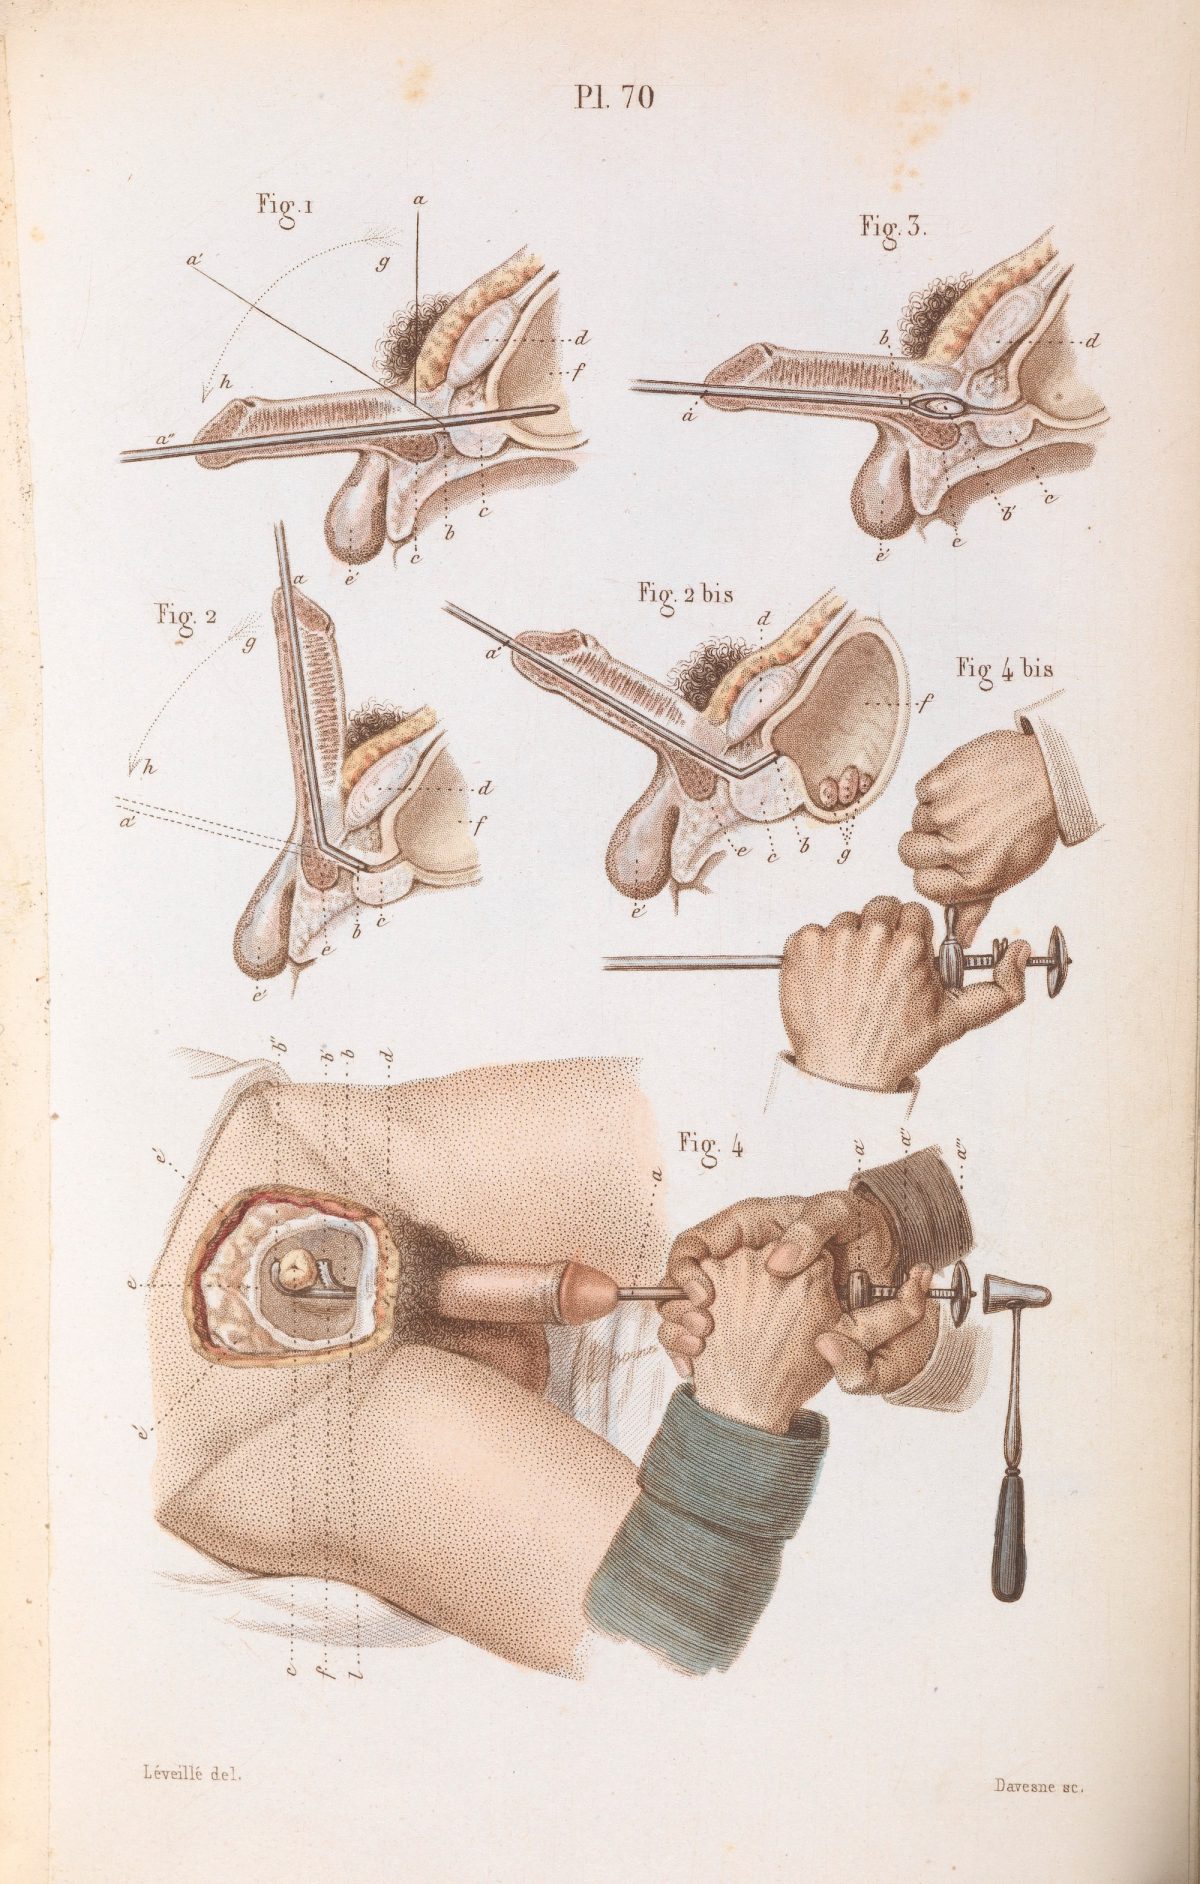 Plate 70, Surgical techniques for lithotripsy (the removal of bladder and kidney stones).